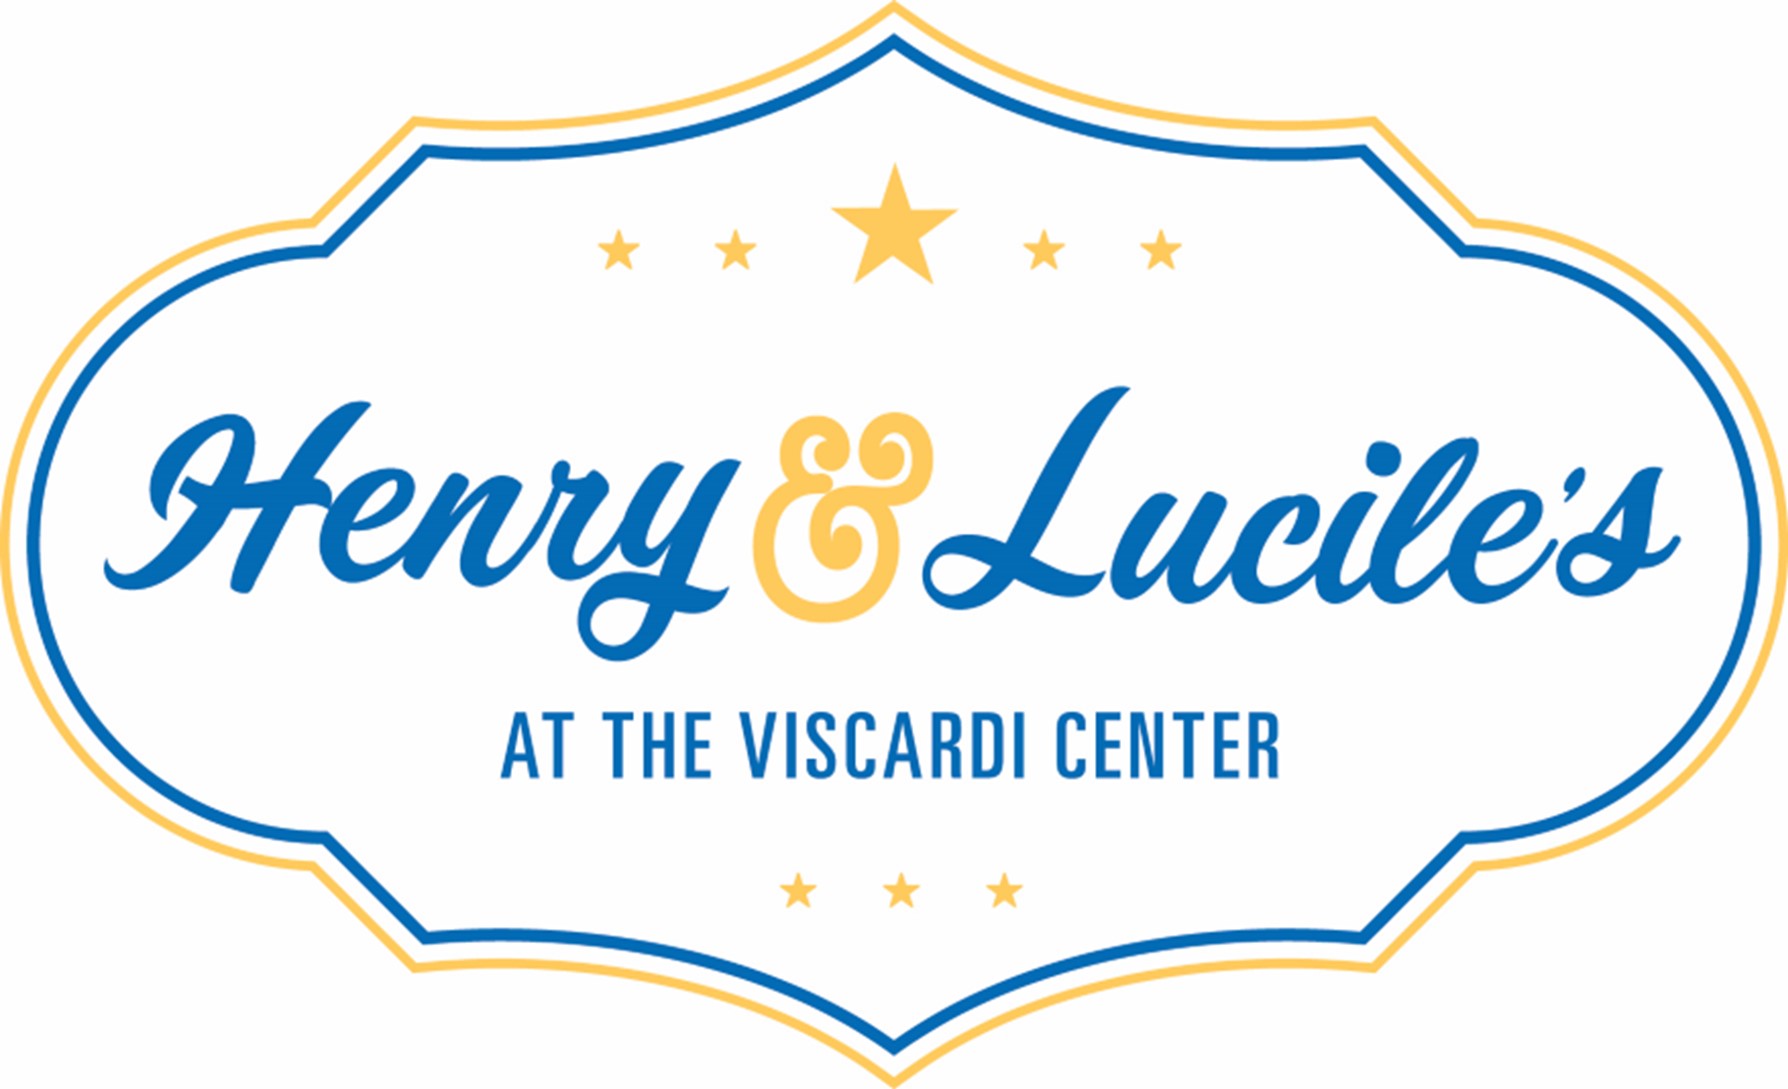 Henry and Lucile's at The Viscardi Center